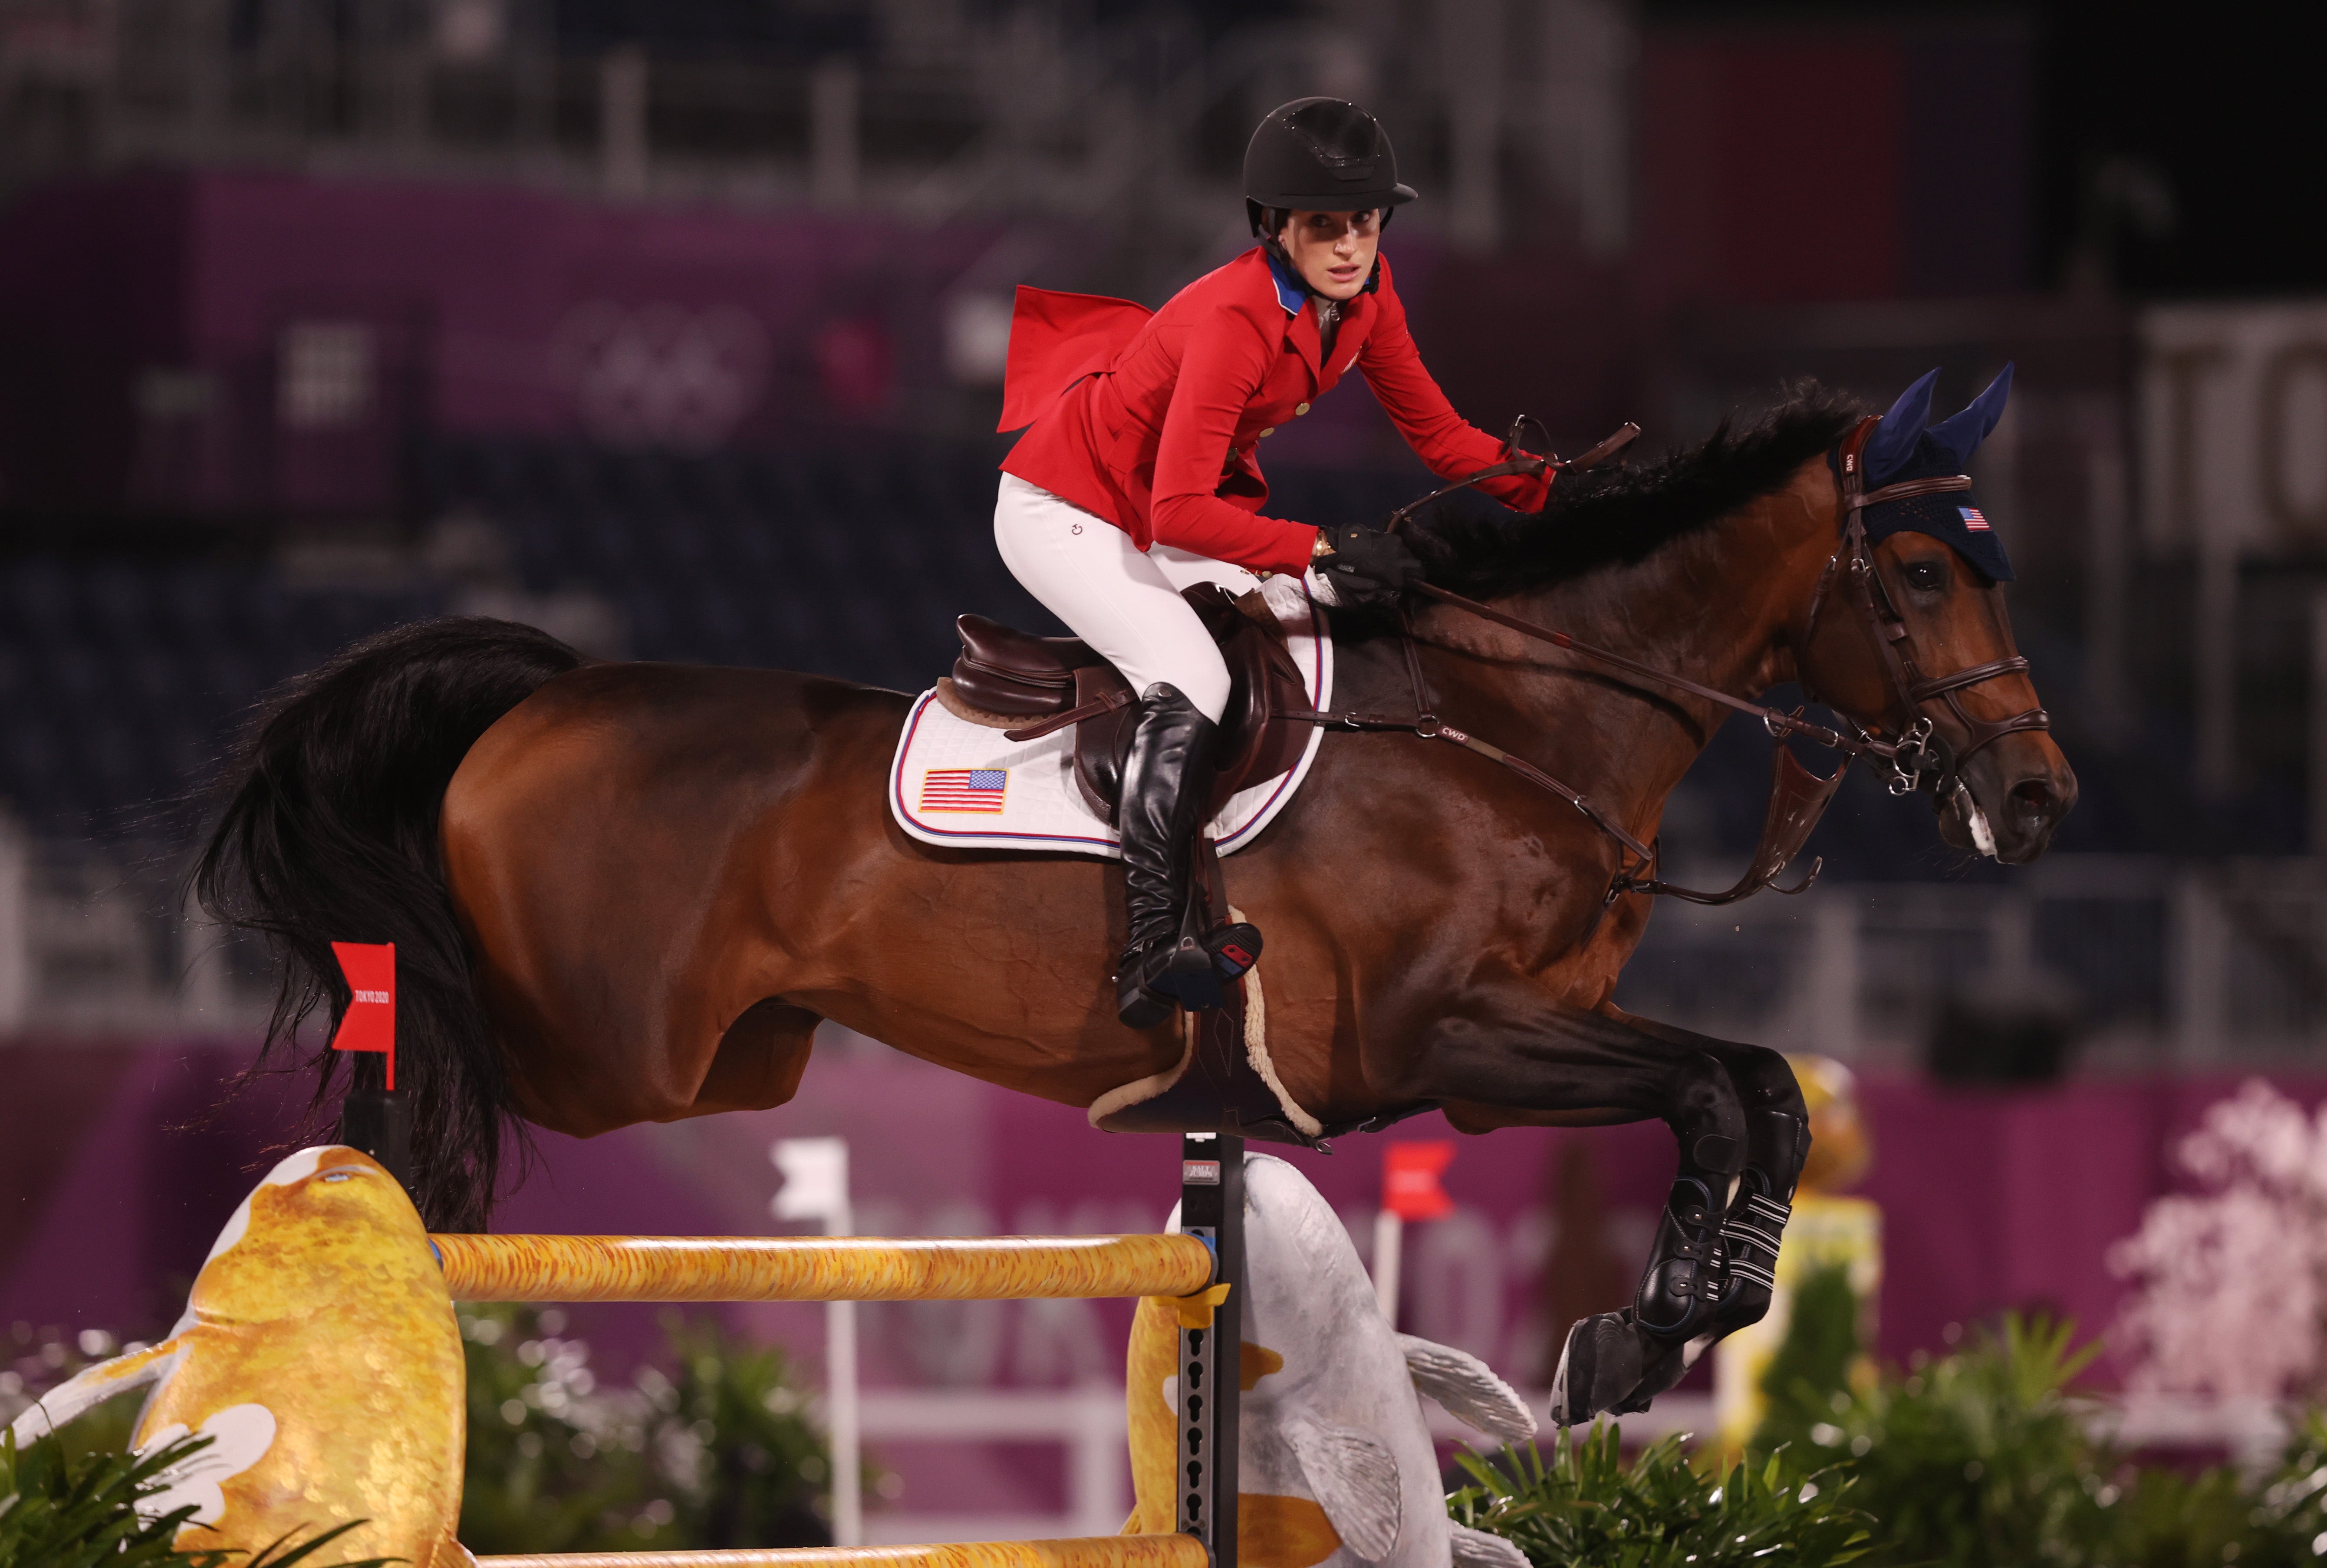 Jessica Springsteen of Team United States riding Don Juan Van De Donkhoeve competes during the Jumping Individual Qualifier on day eleven of the Tokyo 2020 Olympic Games at Equestrian Park on August 03, 2021 in Tokyo, Japan.